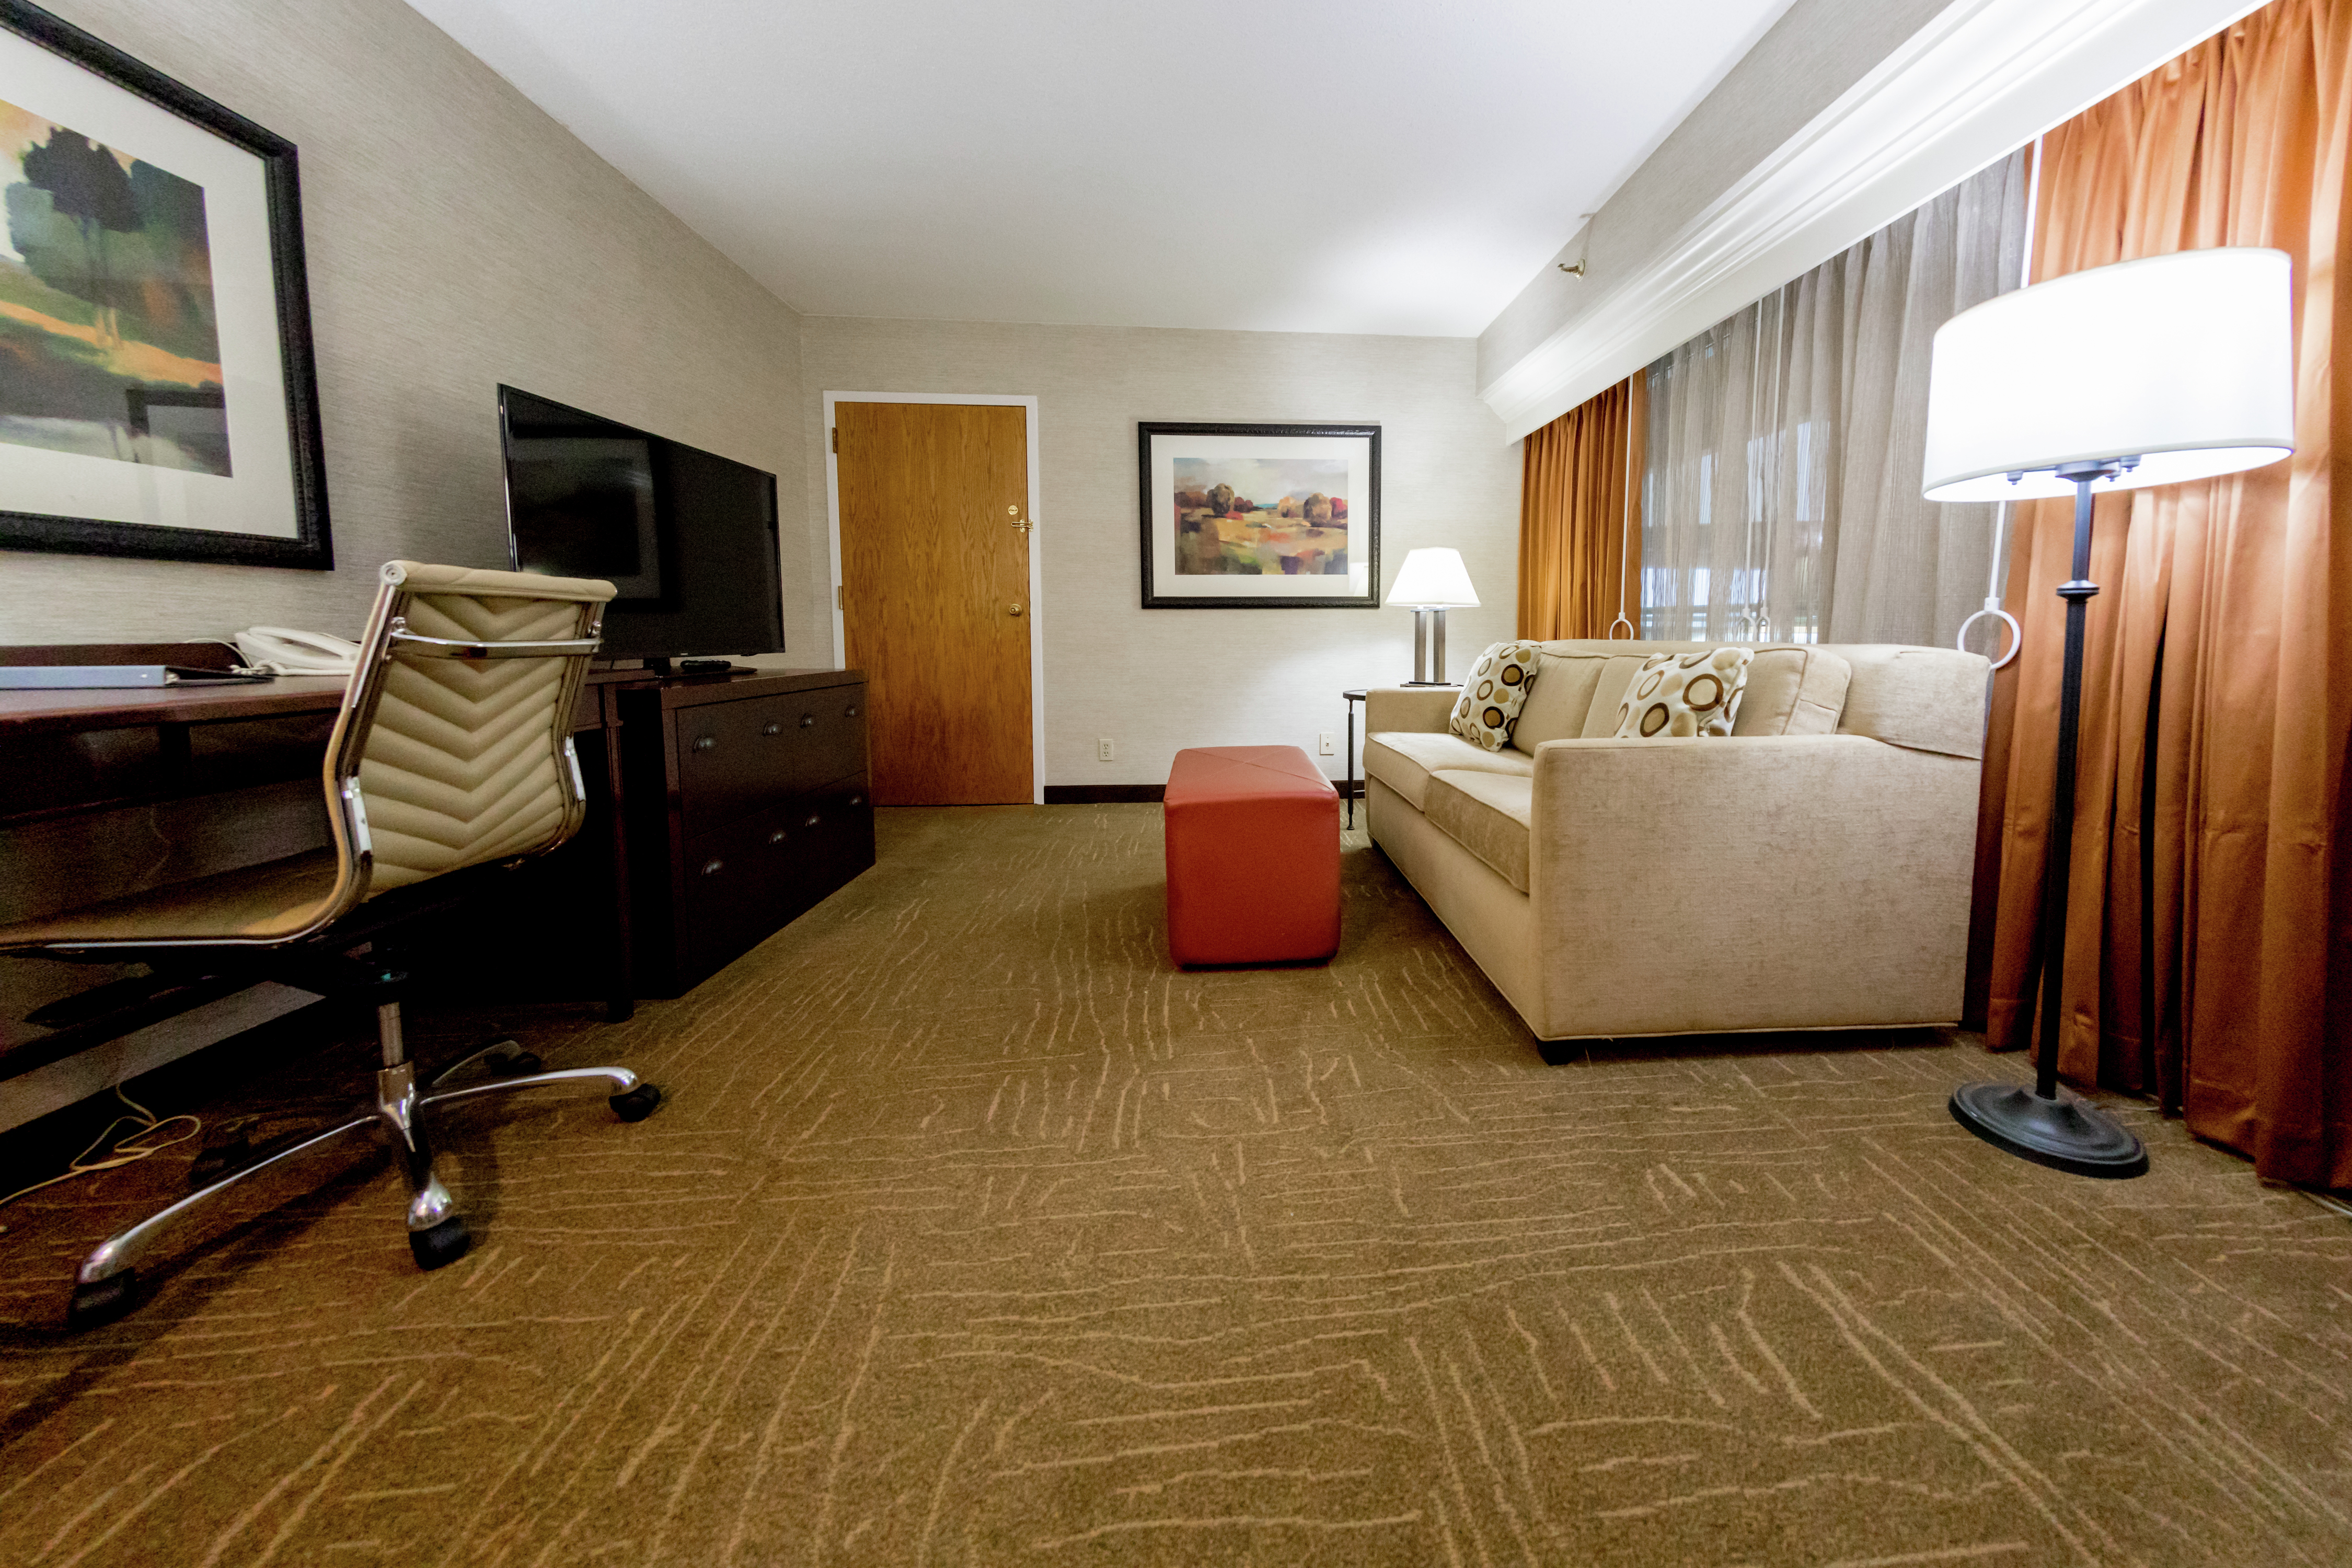 Accessible Guestroom Parlor with Work Desk, Lounge Area, and Room Technology